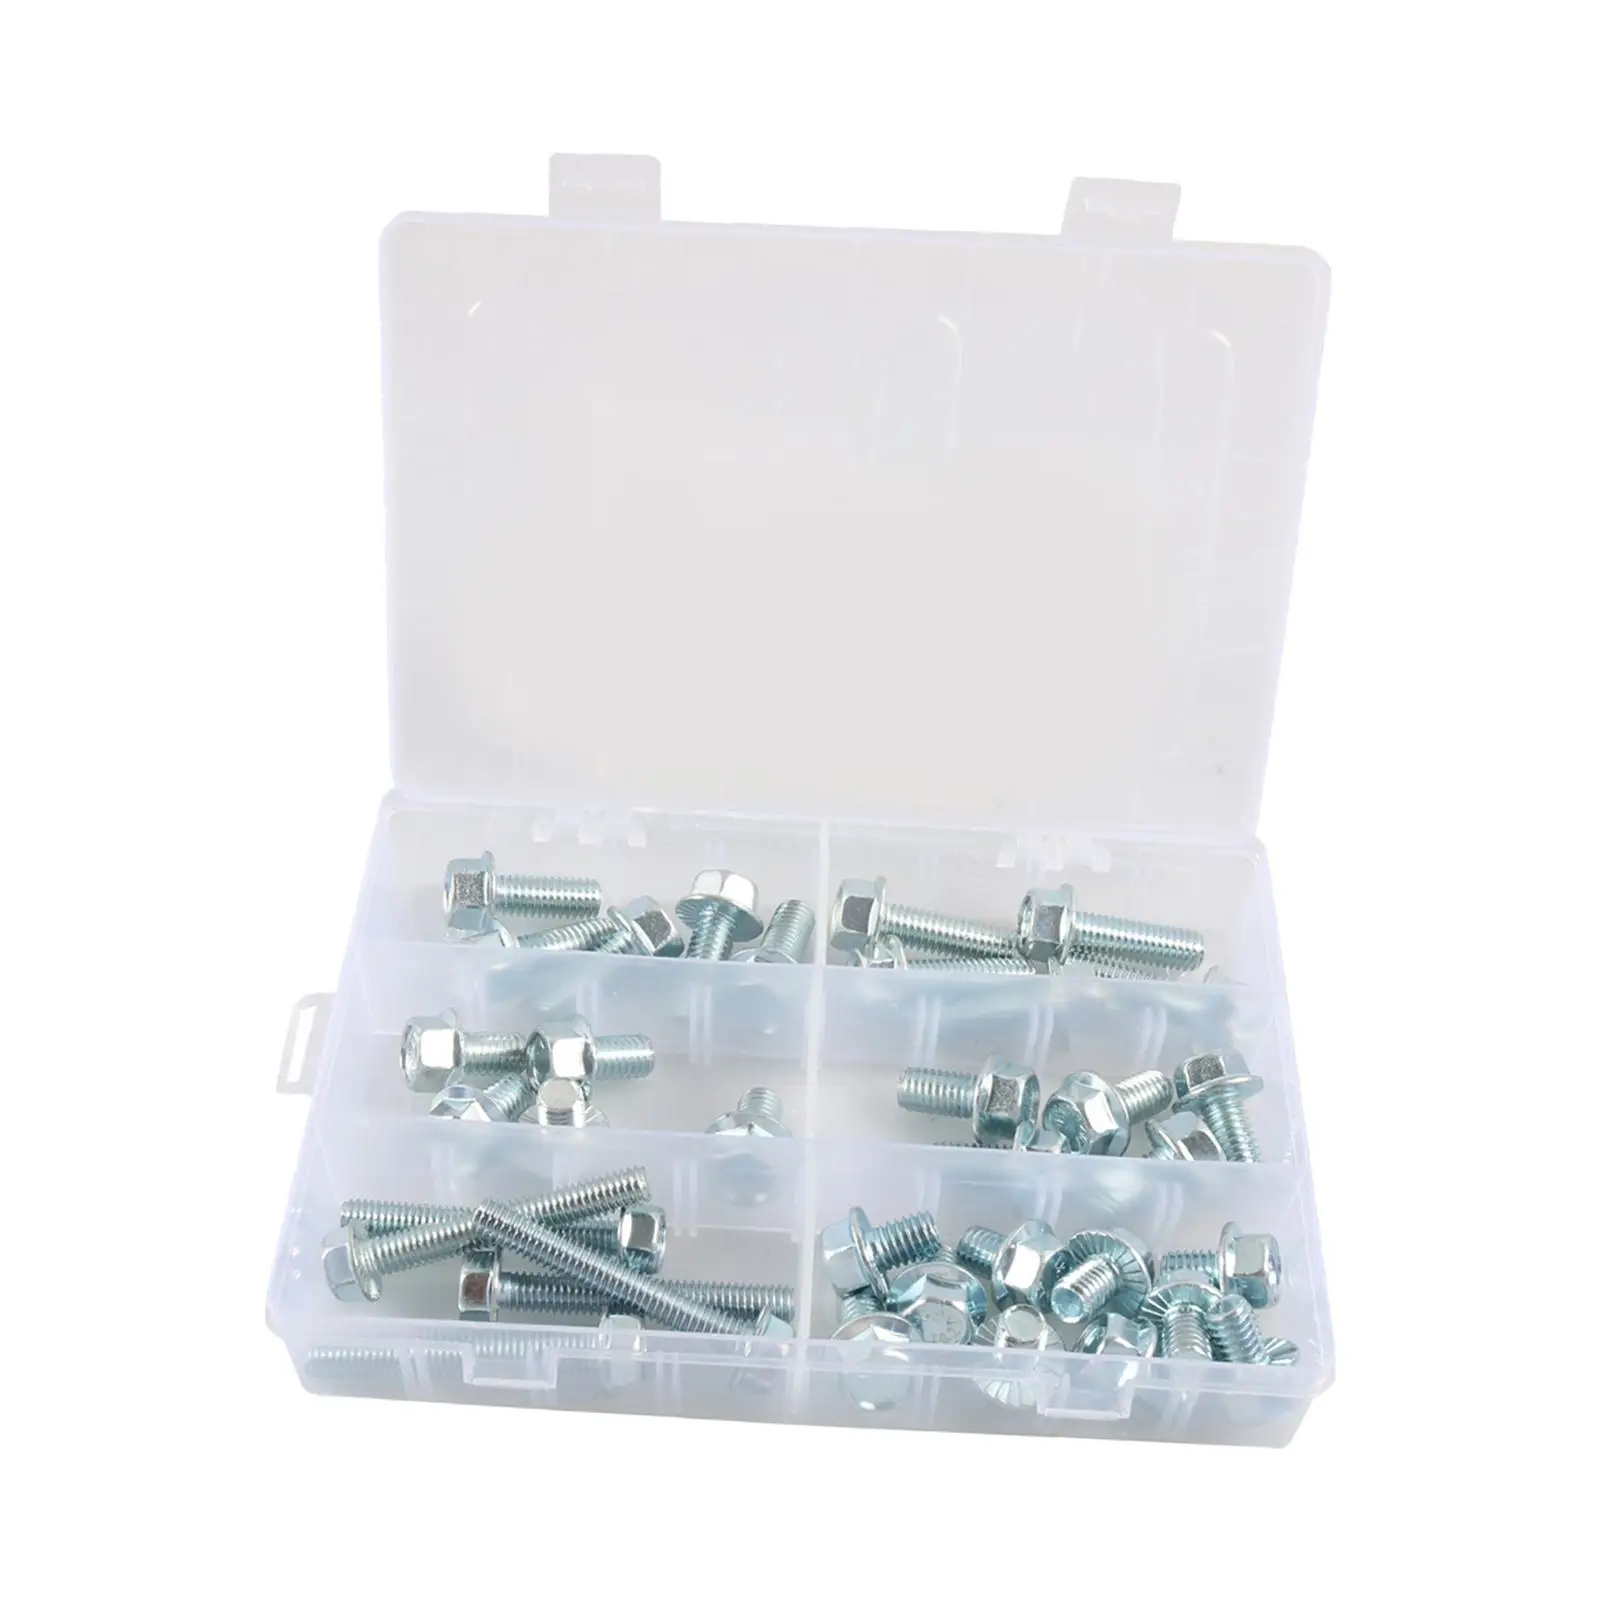 35x nut bolts Set, Fasteners Kits Hardened Steel with Storage Box for Automobile Motorcycle